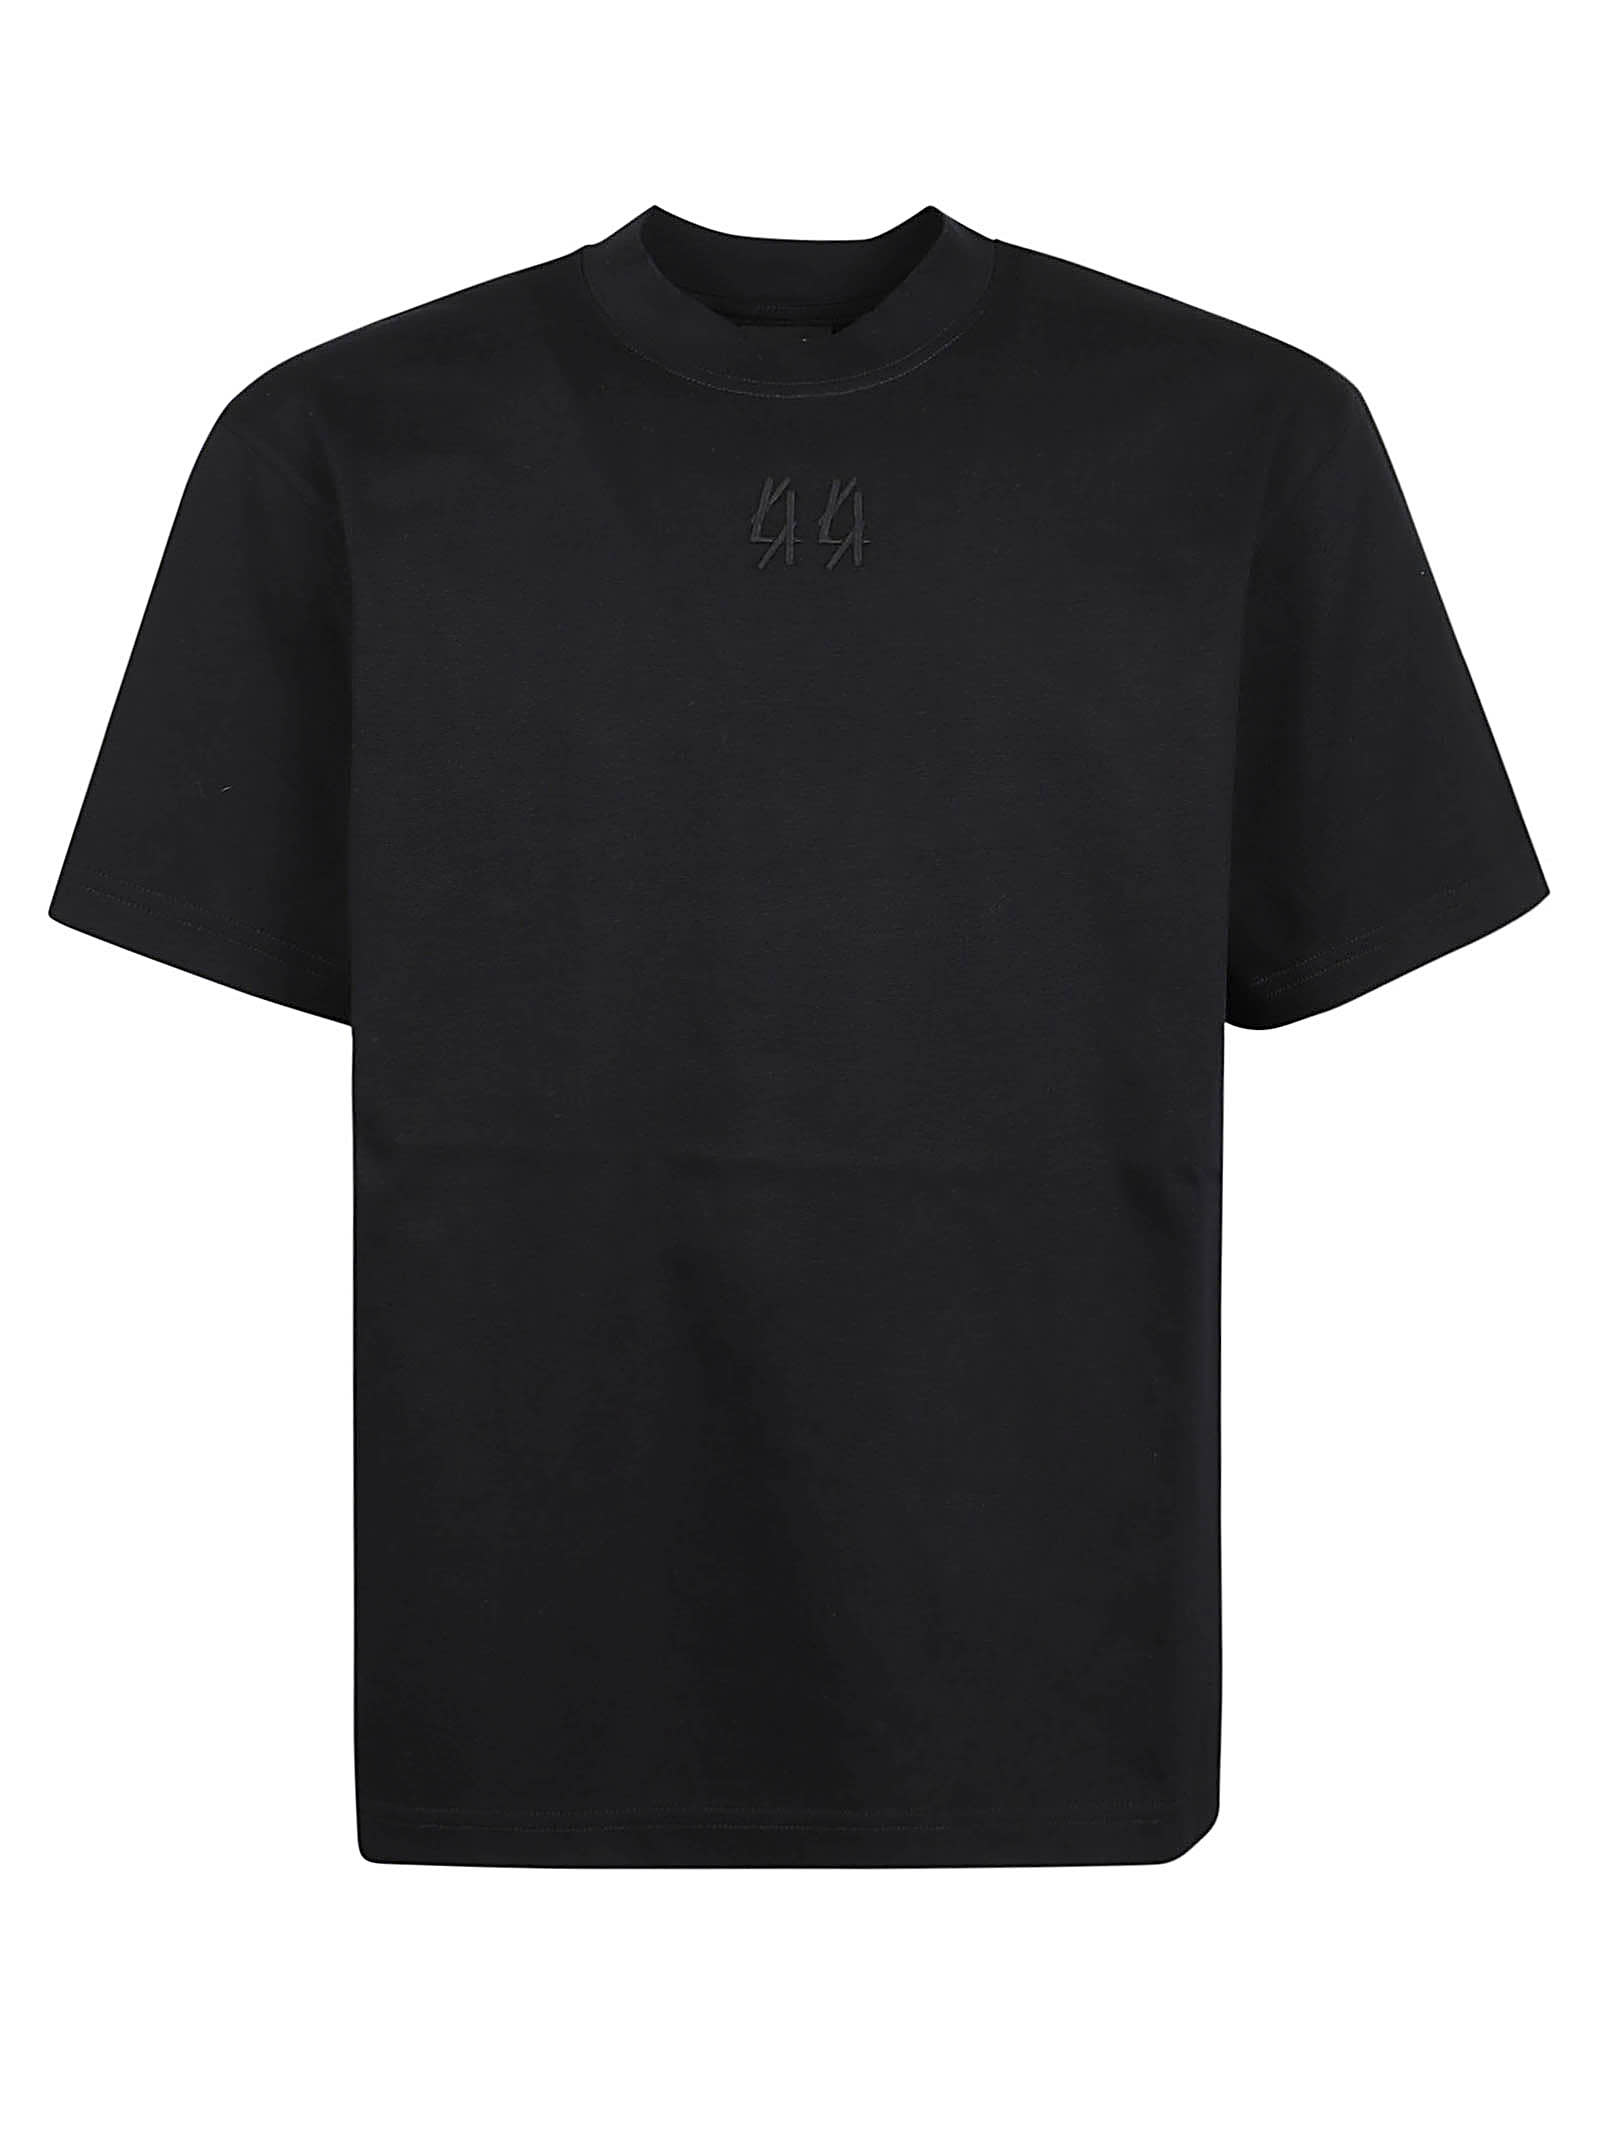 44 LABEL GROUP CLASSIC TEE